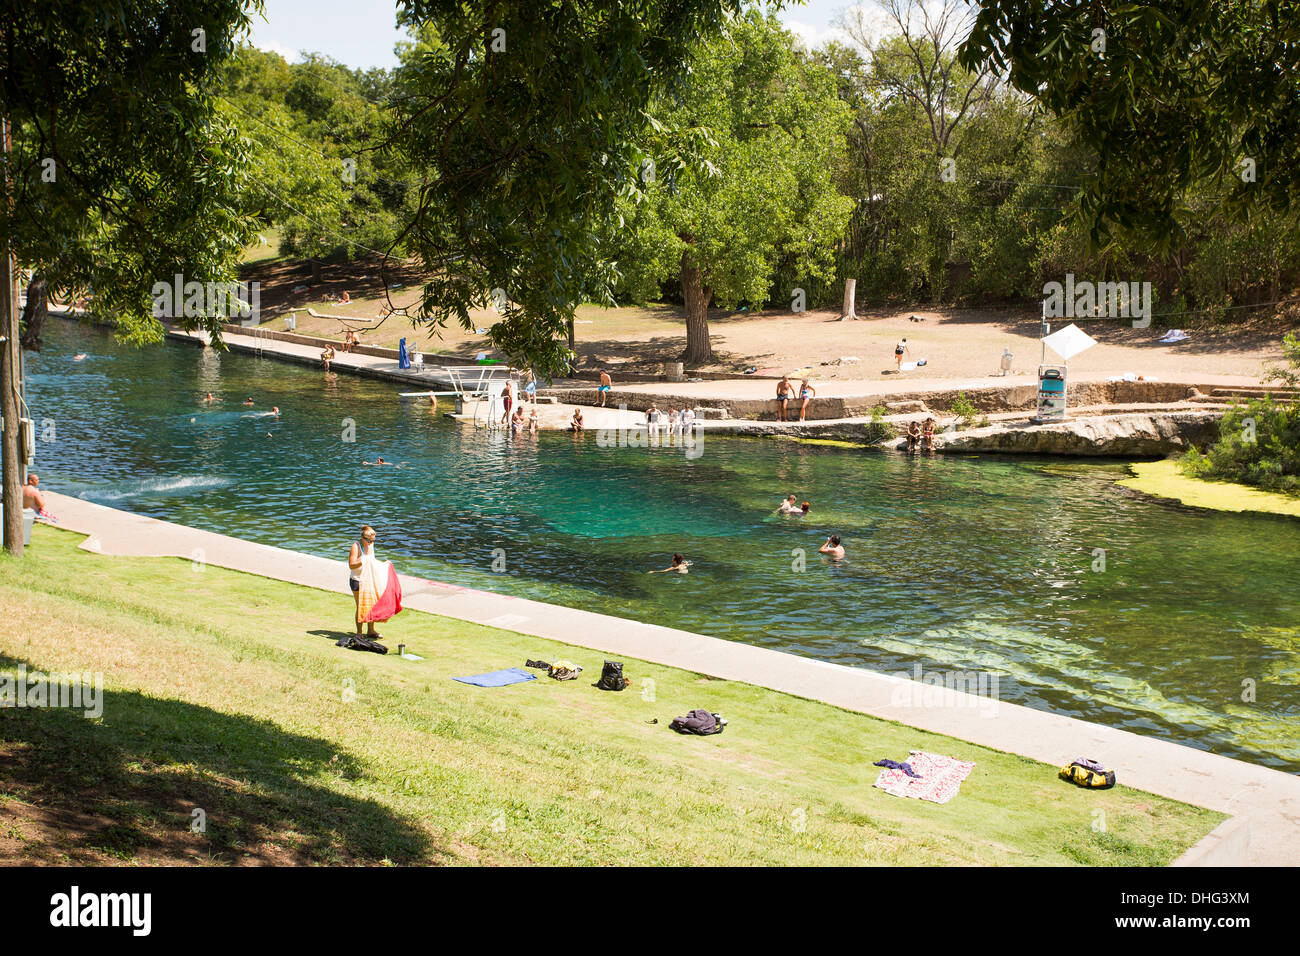 People swim in the outdoor swimming pool at Barton Springs Pool in Austin, Texas, on a hot sunny summer day. Stock Photo